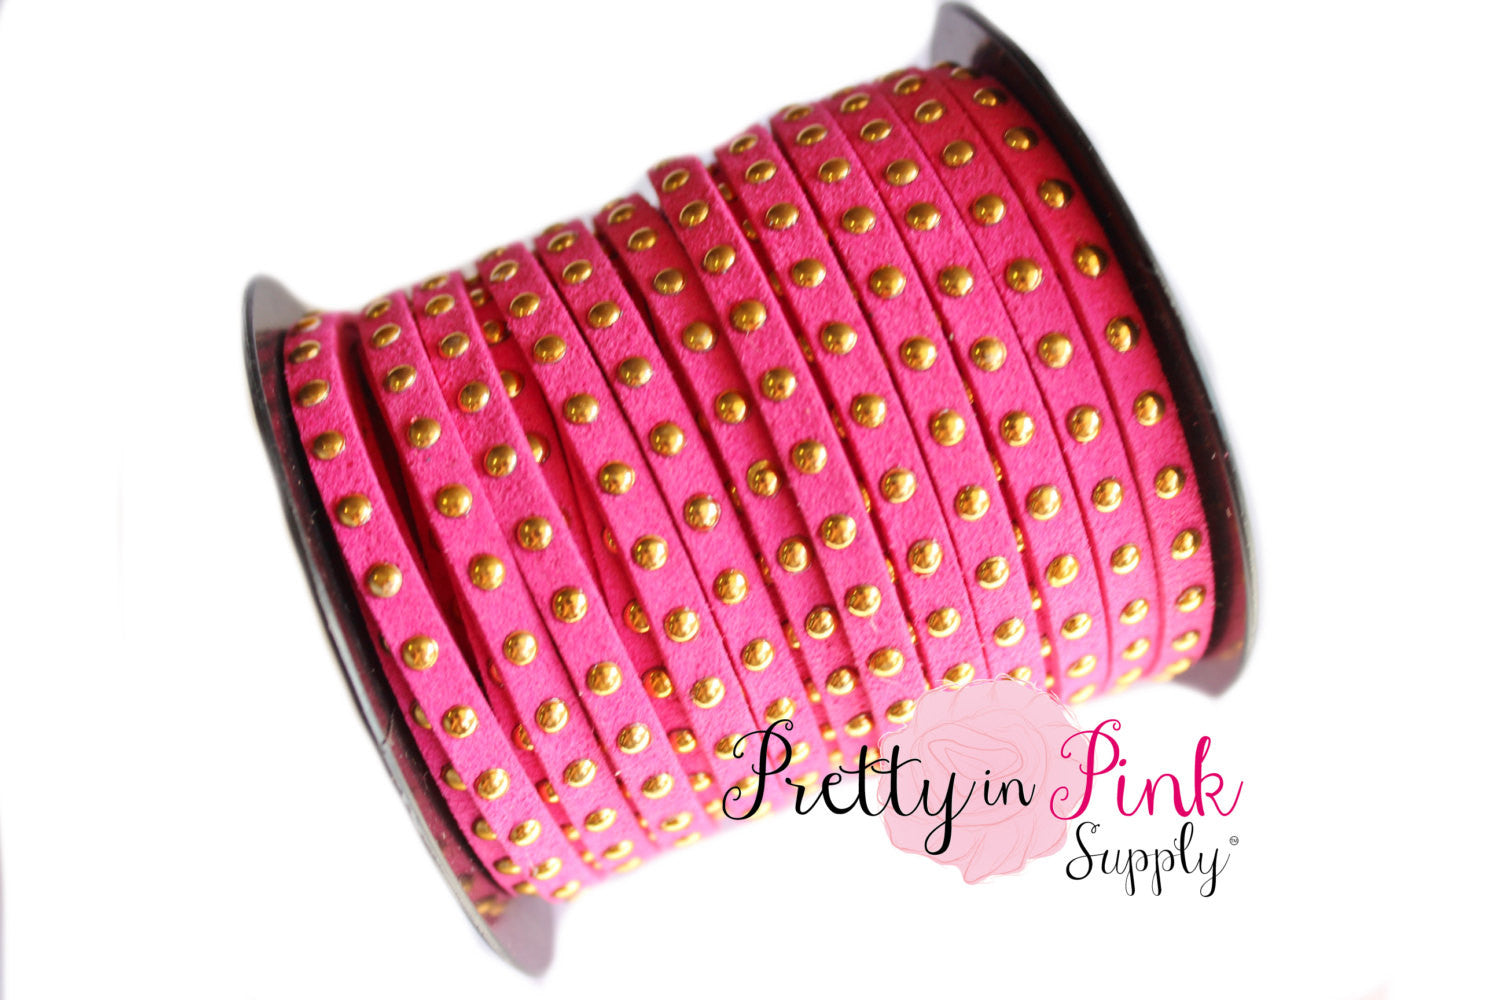 Dark Pink Faux Suede Gold Studded Cord - Pretty in Pink Supply